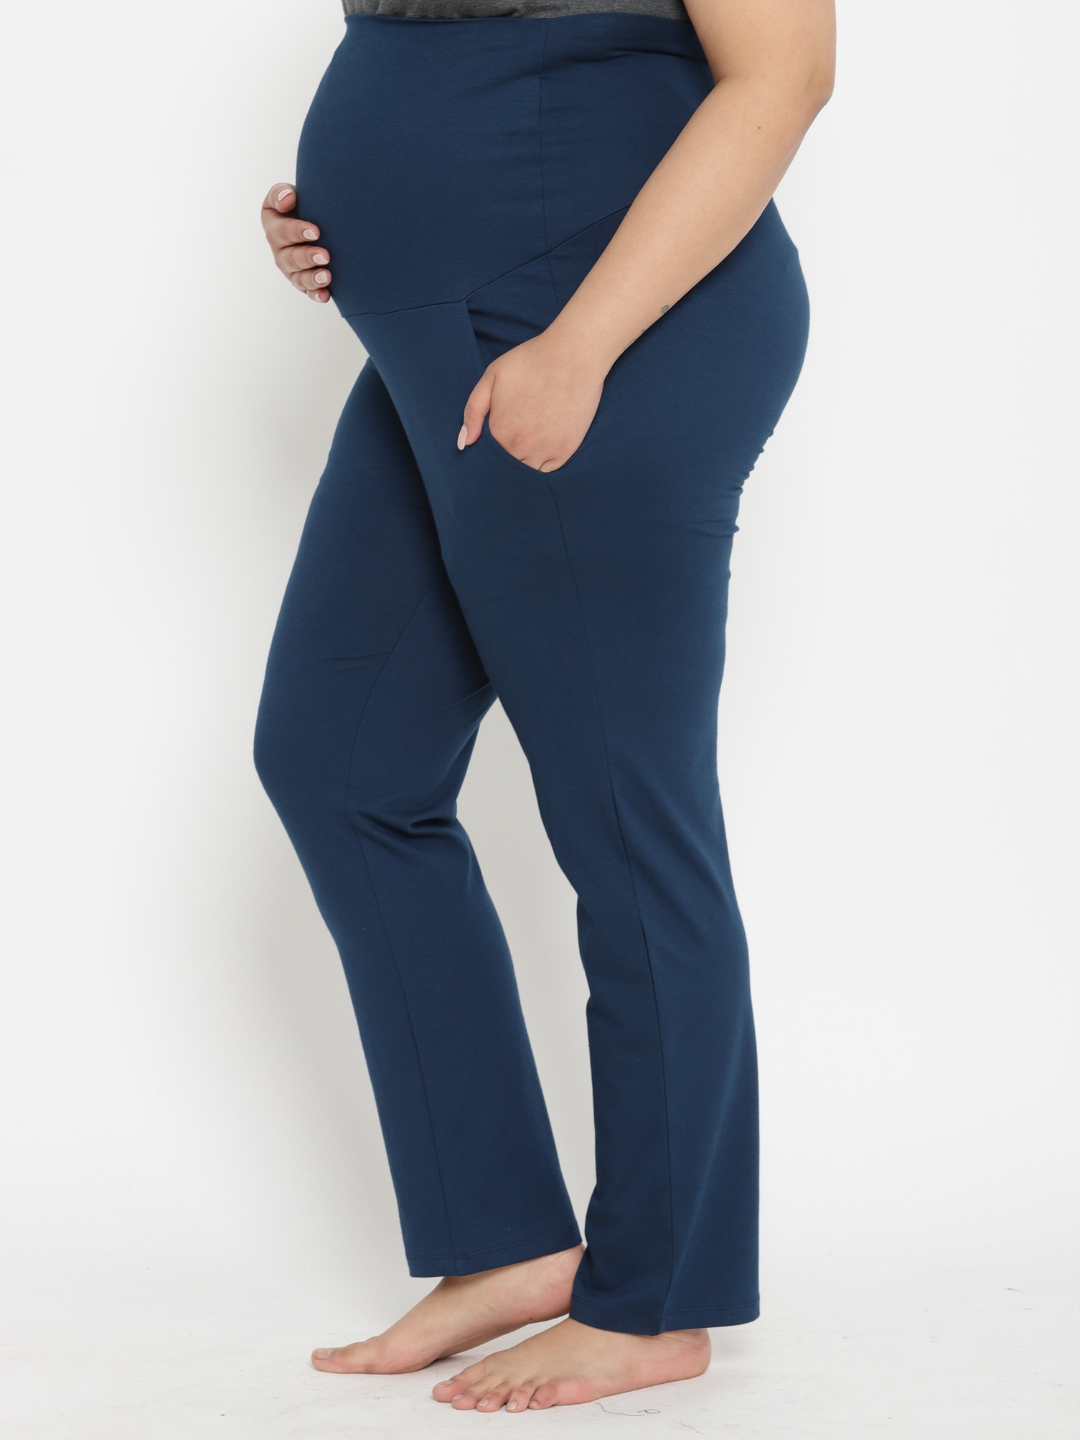 Pregnant Women Work Pants Stretchy Maternity Skinny Ankle Trousers Slim for  Women  Walmartcom